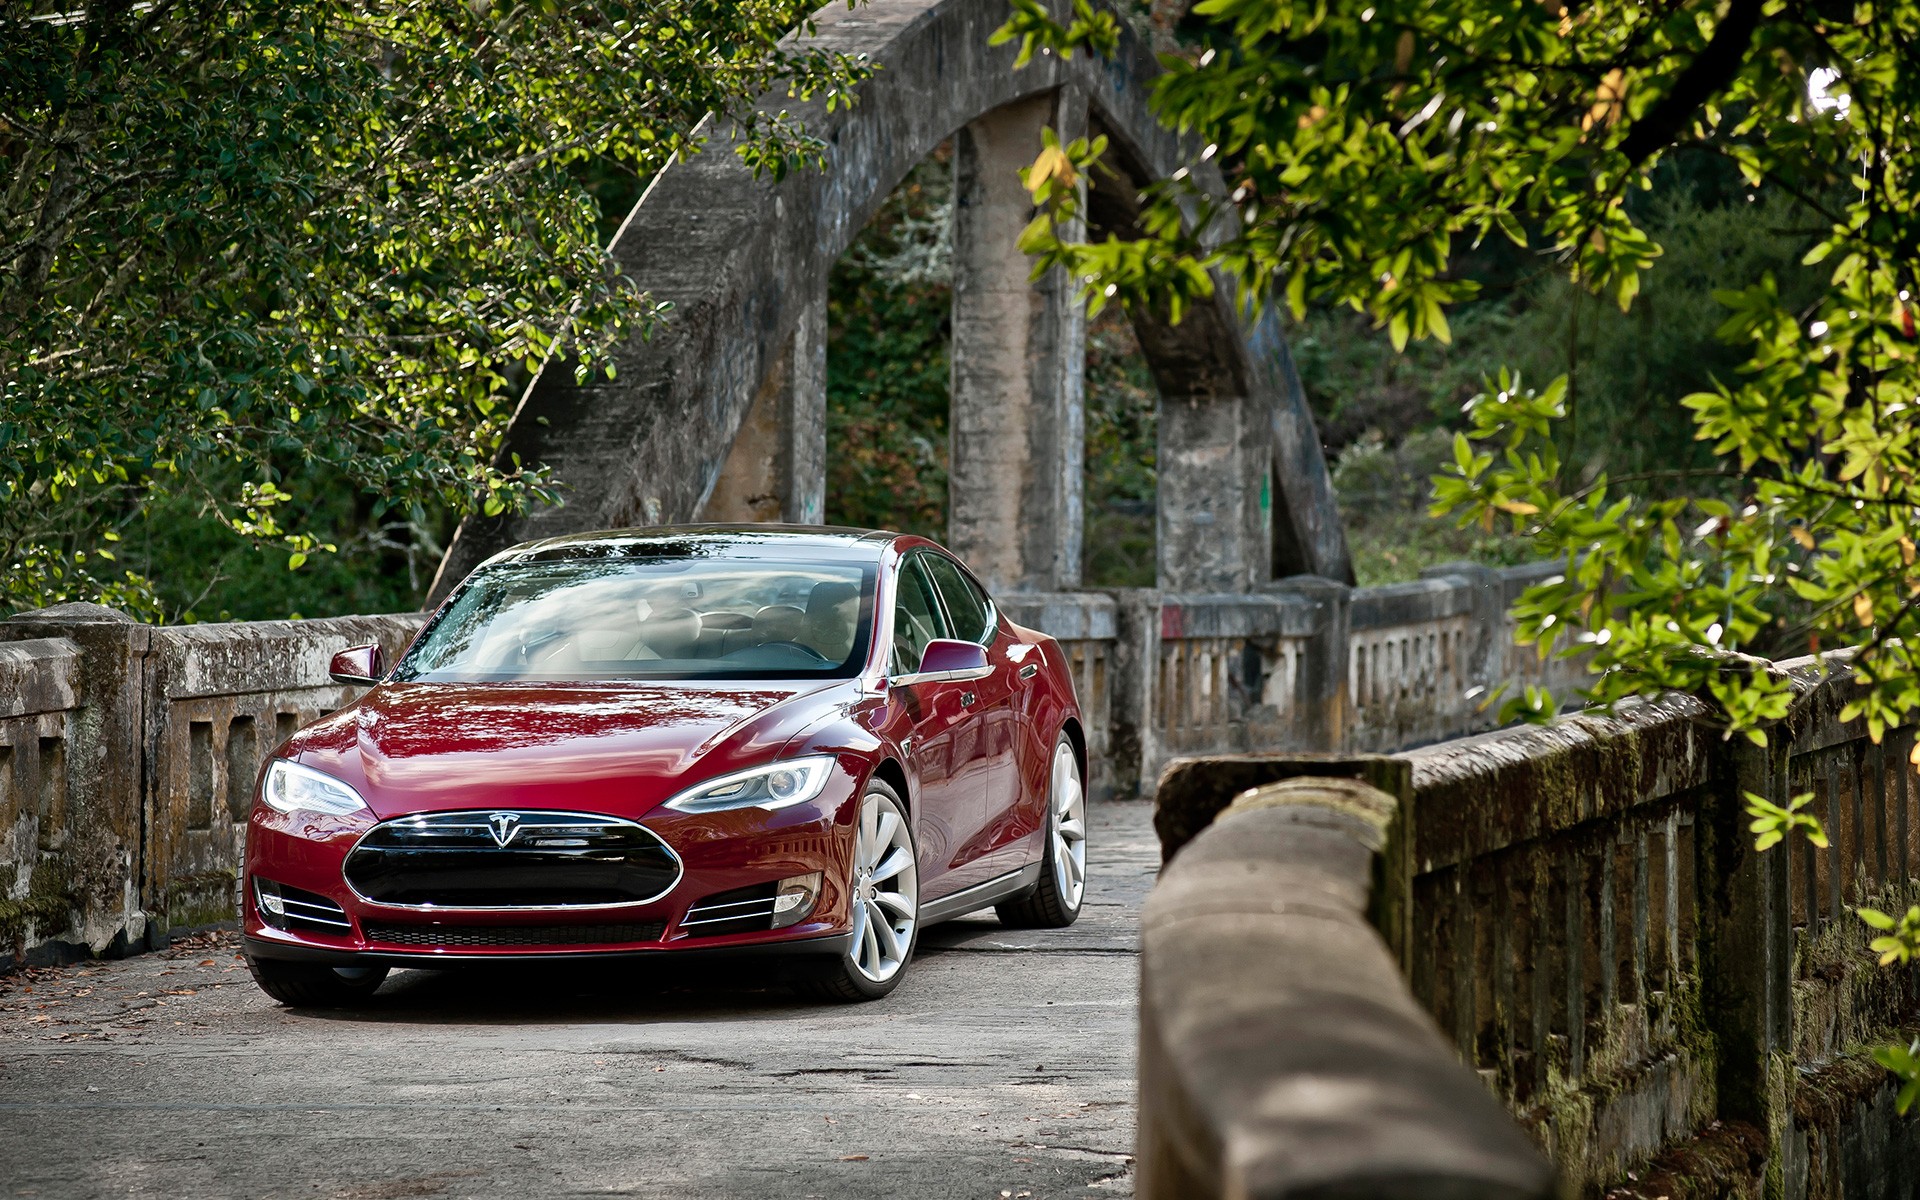 Fine Tesla Photos And Pictures, Tesla High Quality - HD Wallpaper 